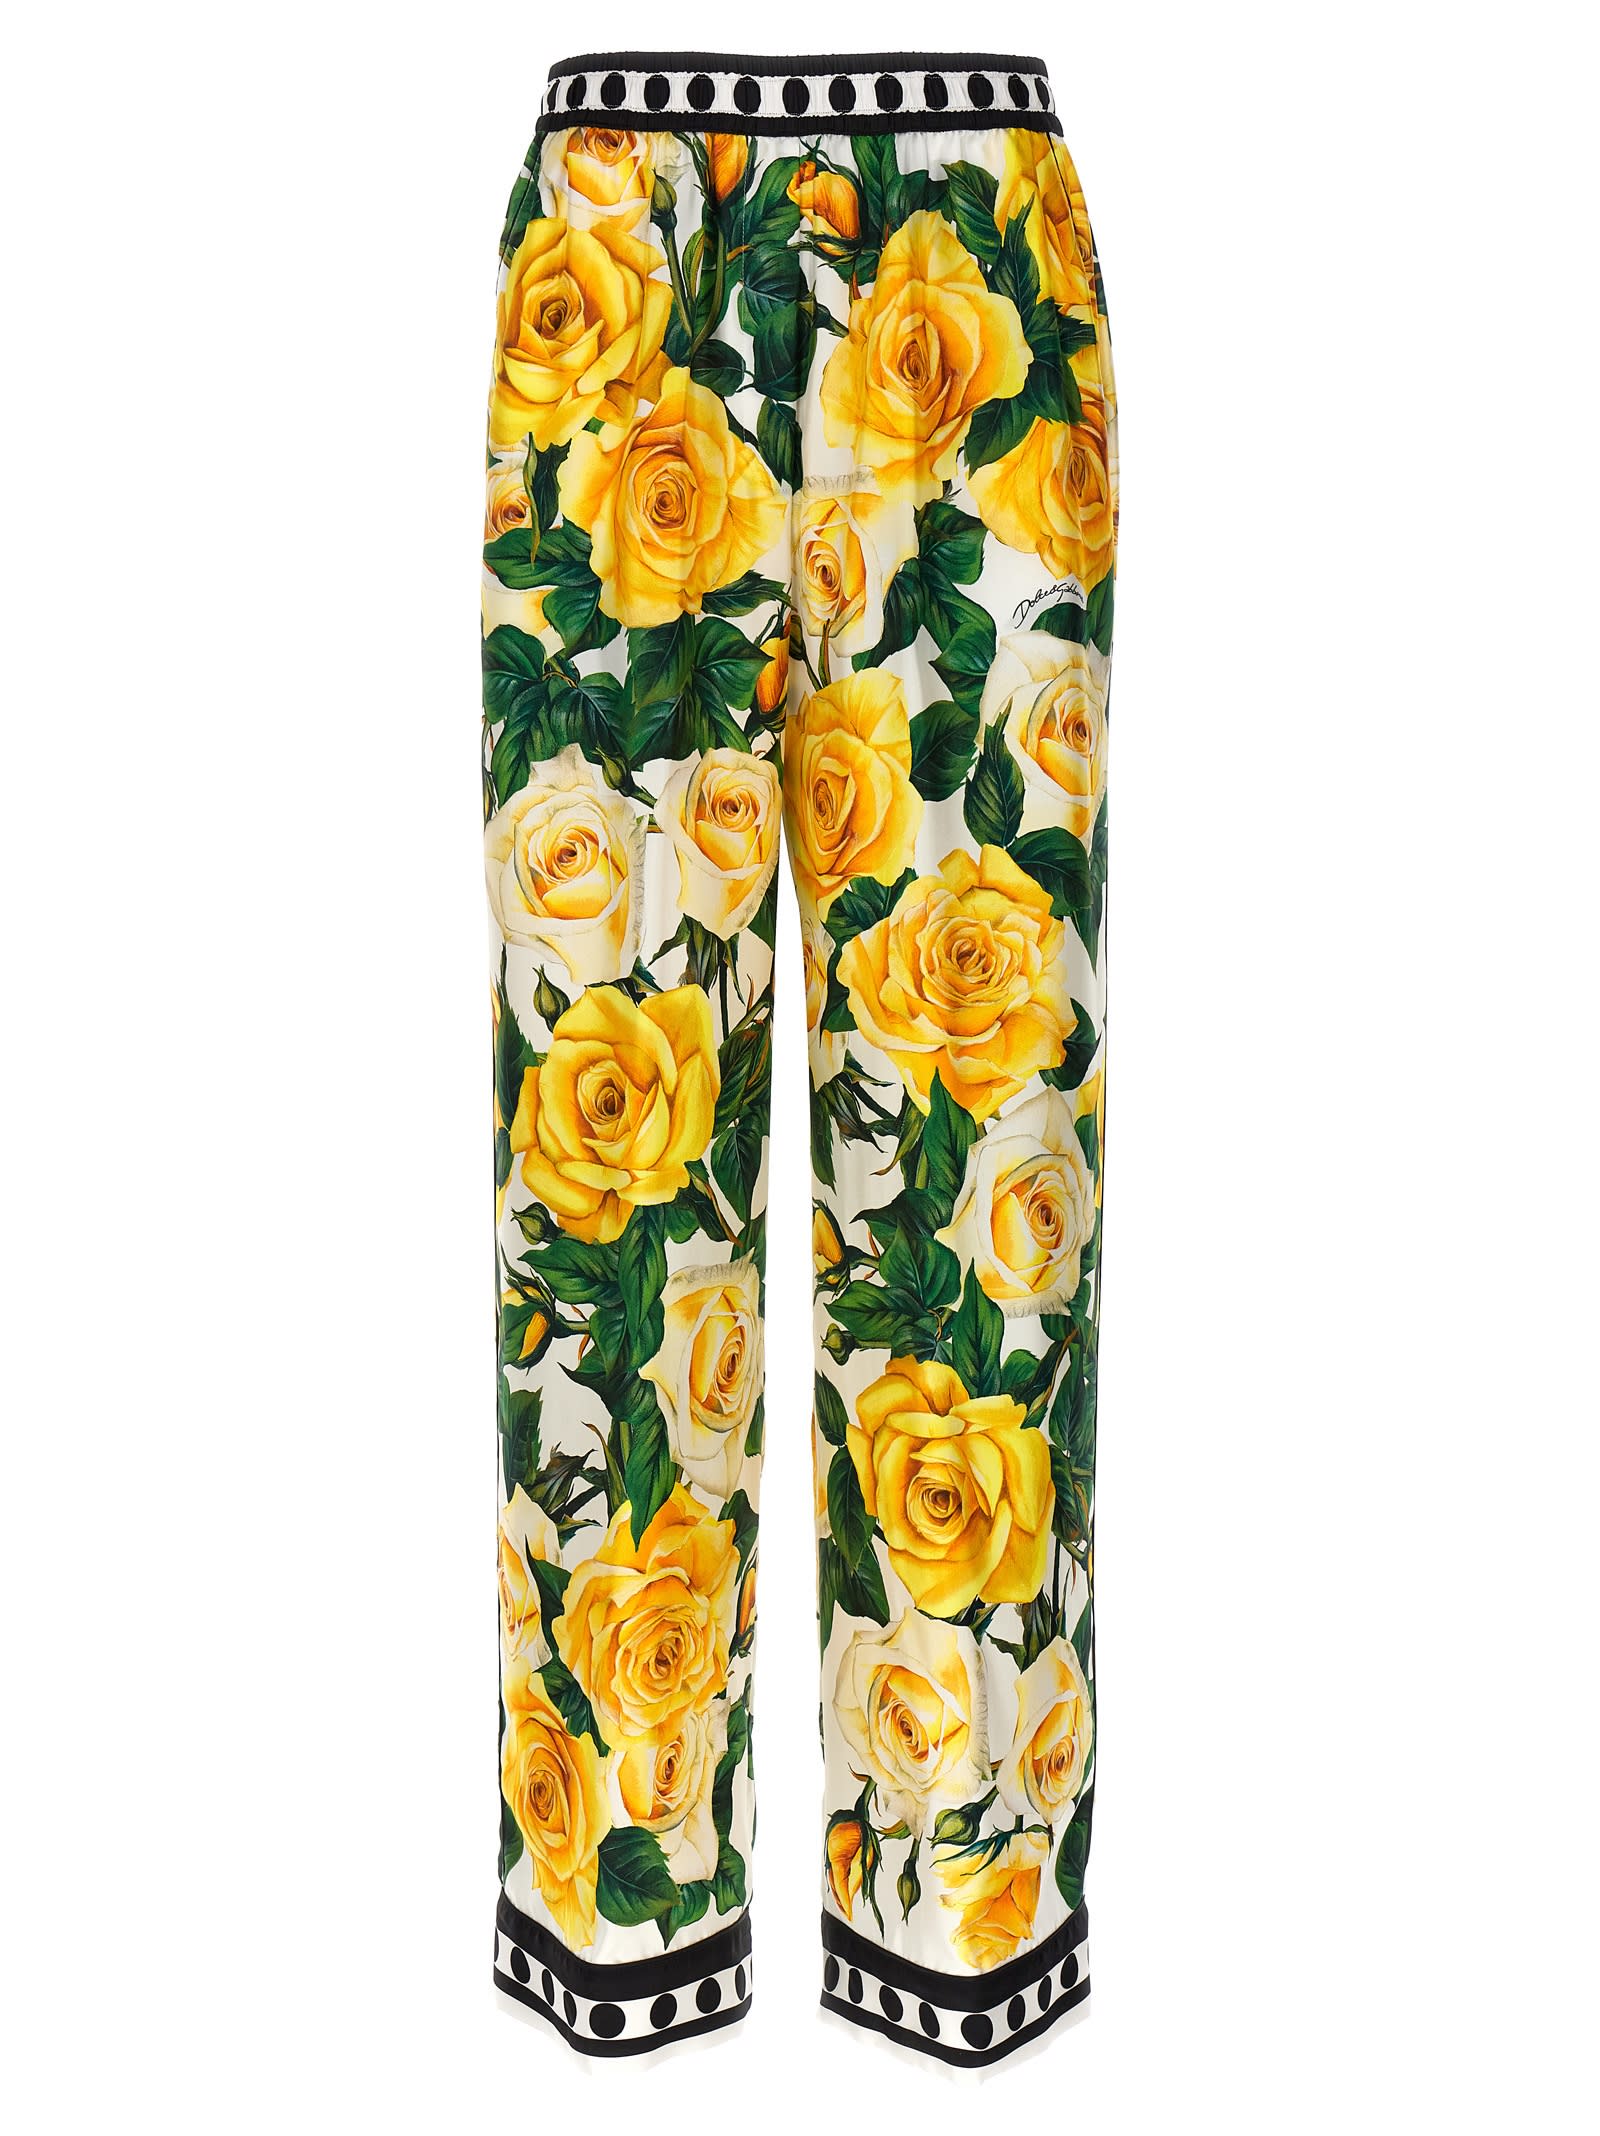 DOLCE & GABBANA ROSE GIALLE TROUSERS